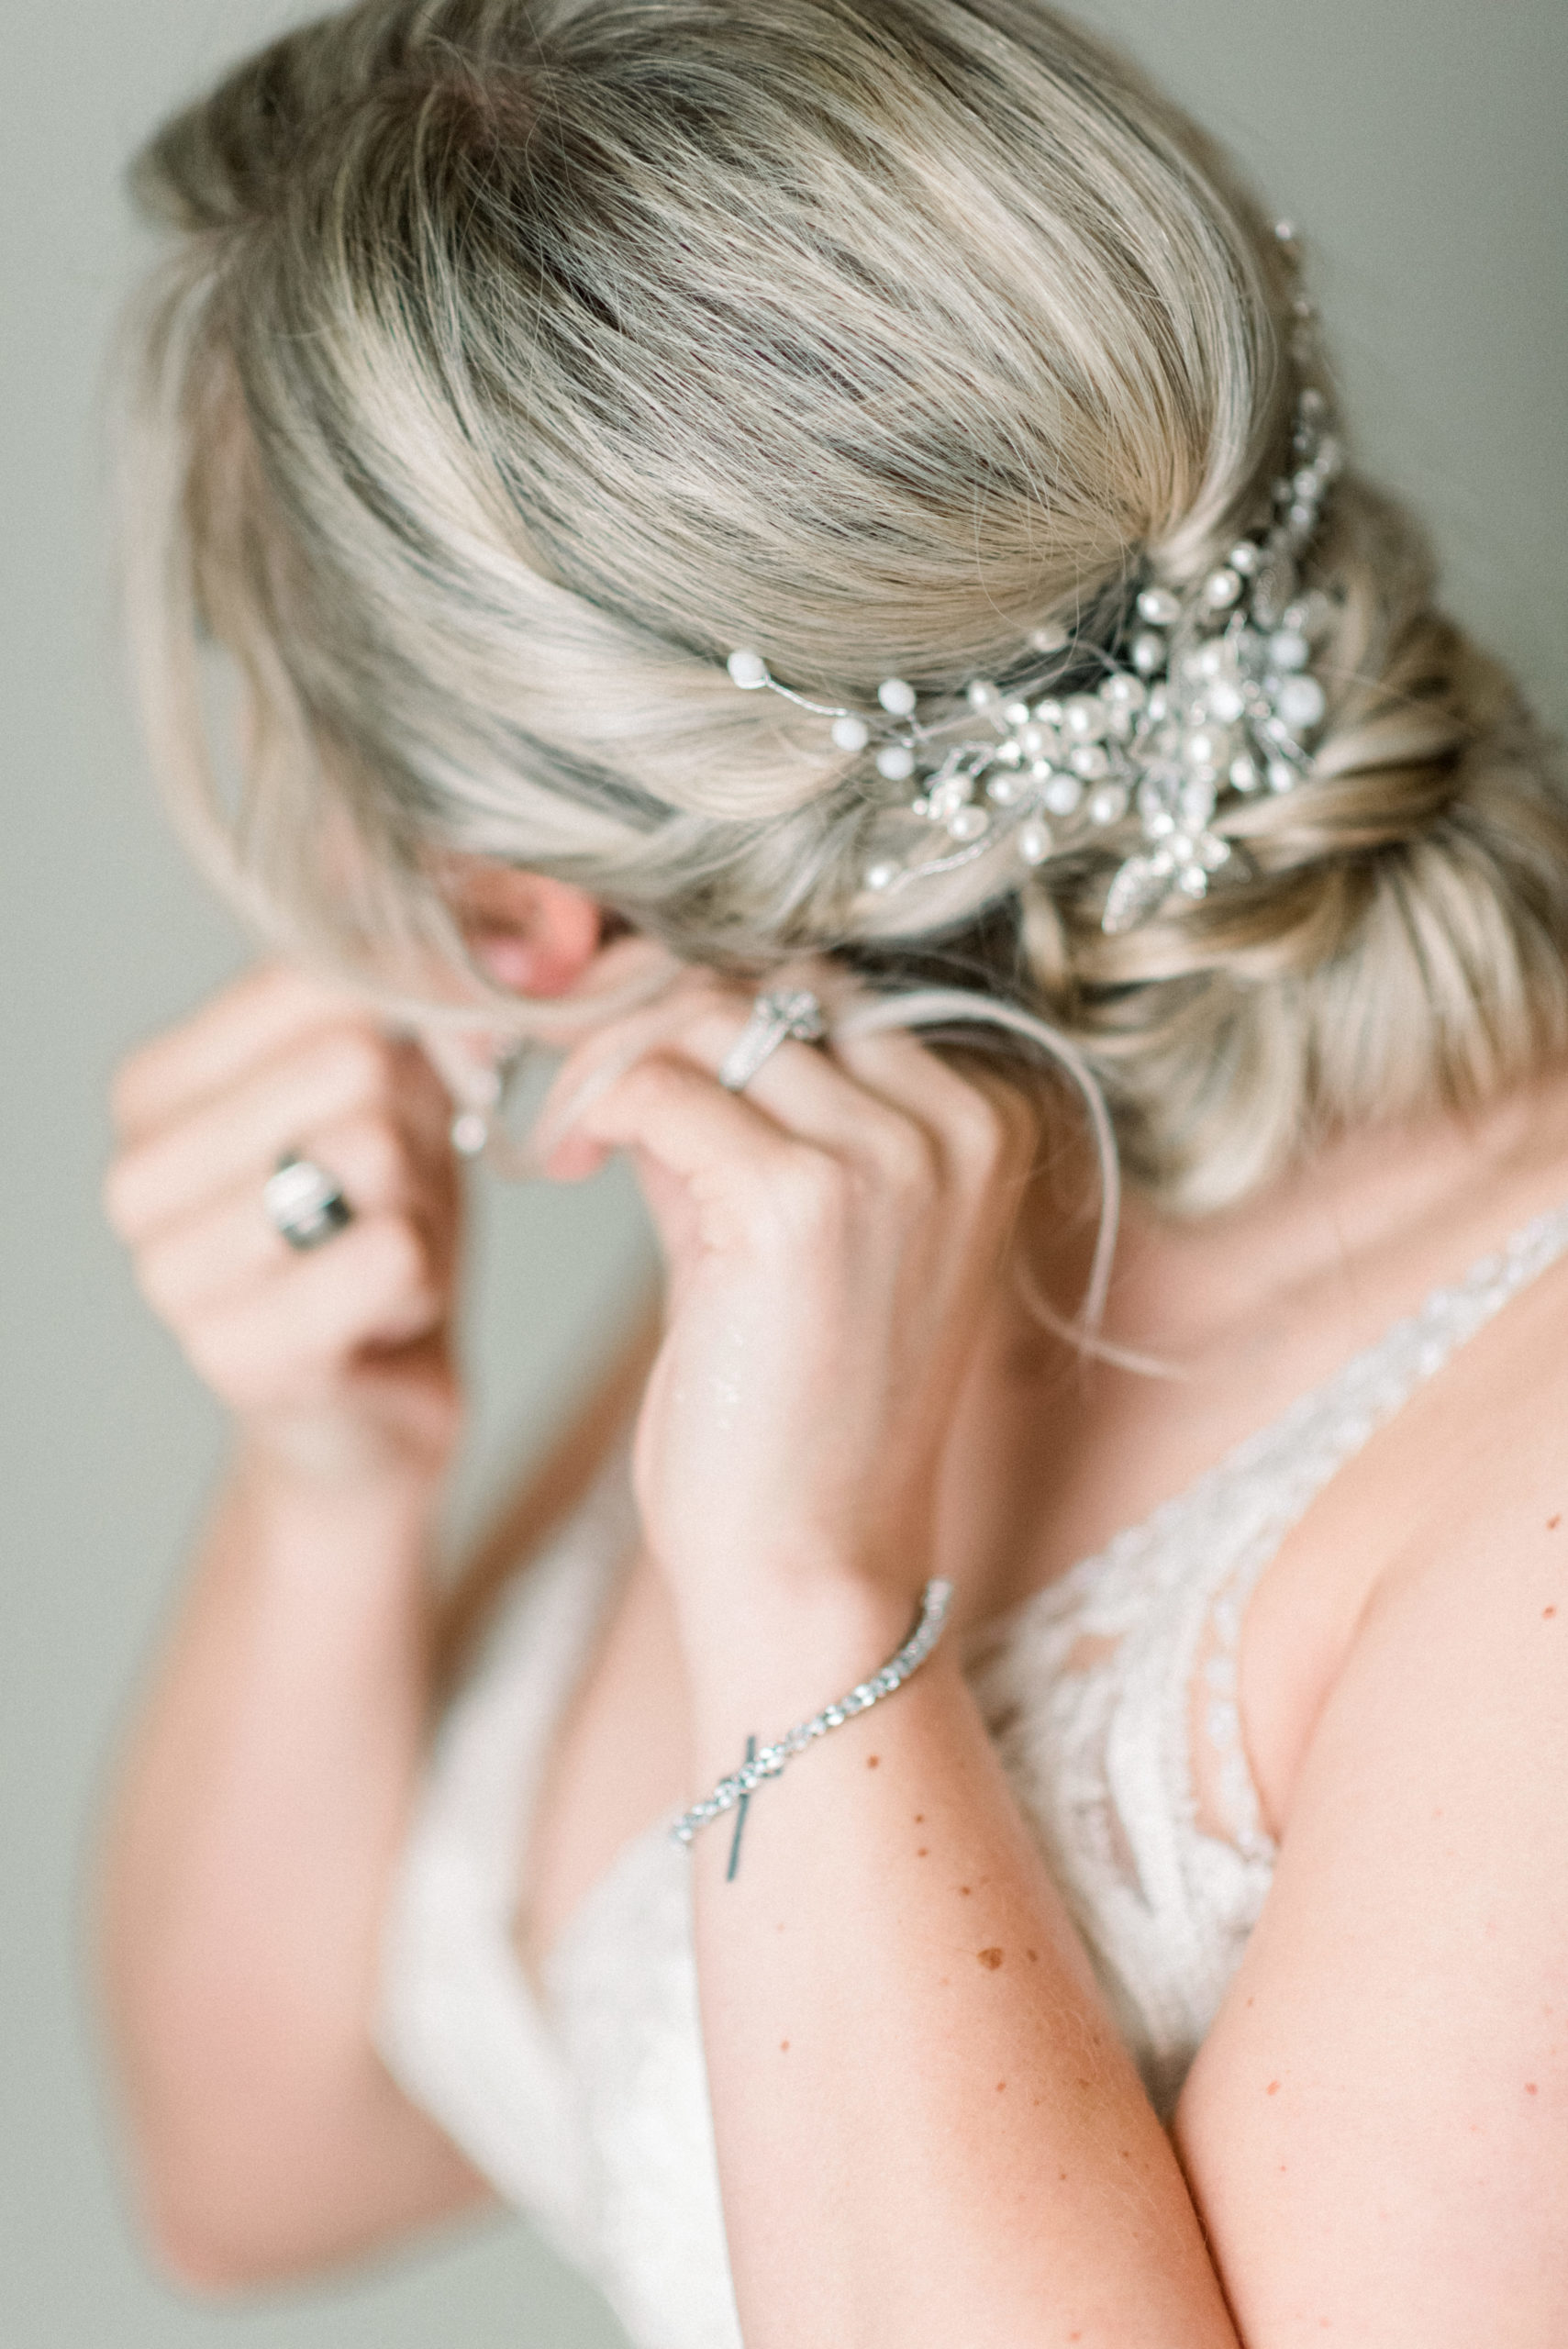 bride putting on earrings before wedding ceremony